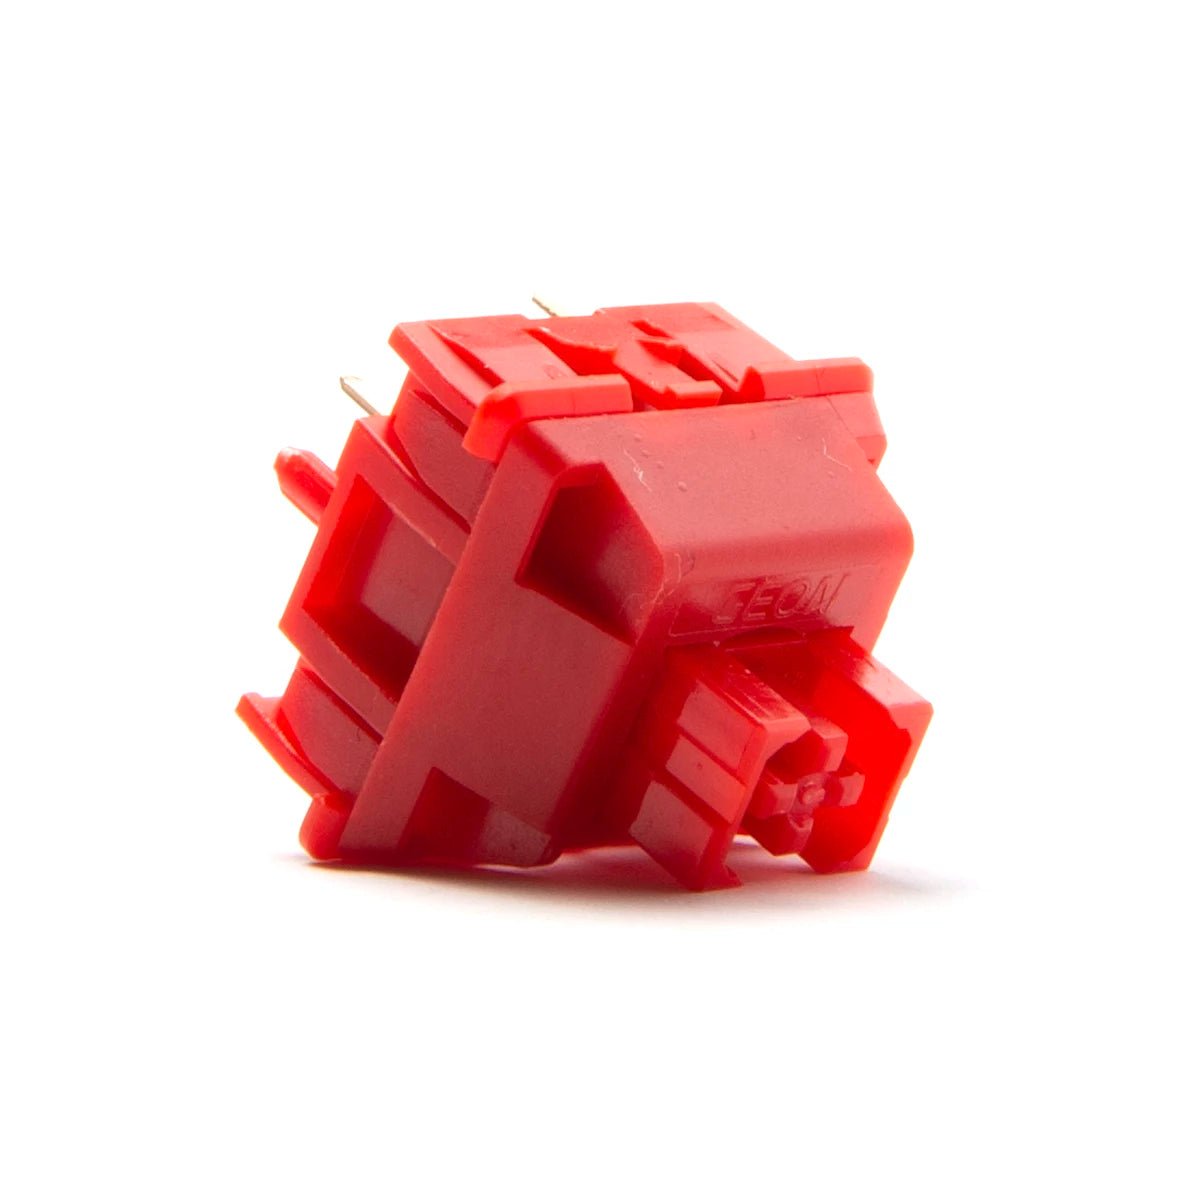 Haimu x Geon HG Red Silent Linear Switches - Divinikey